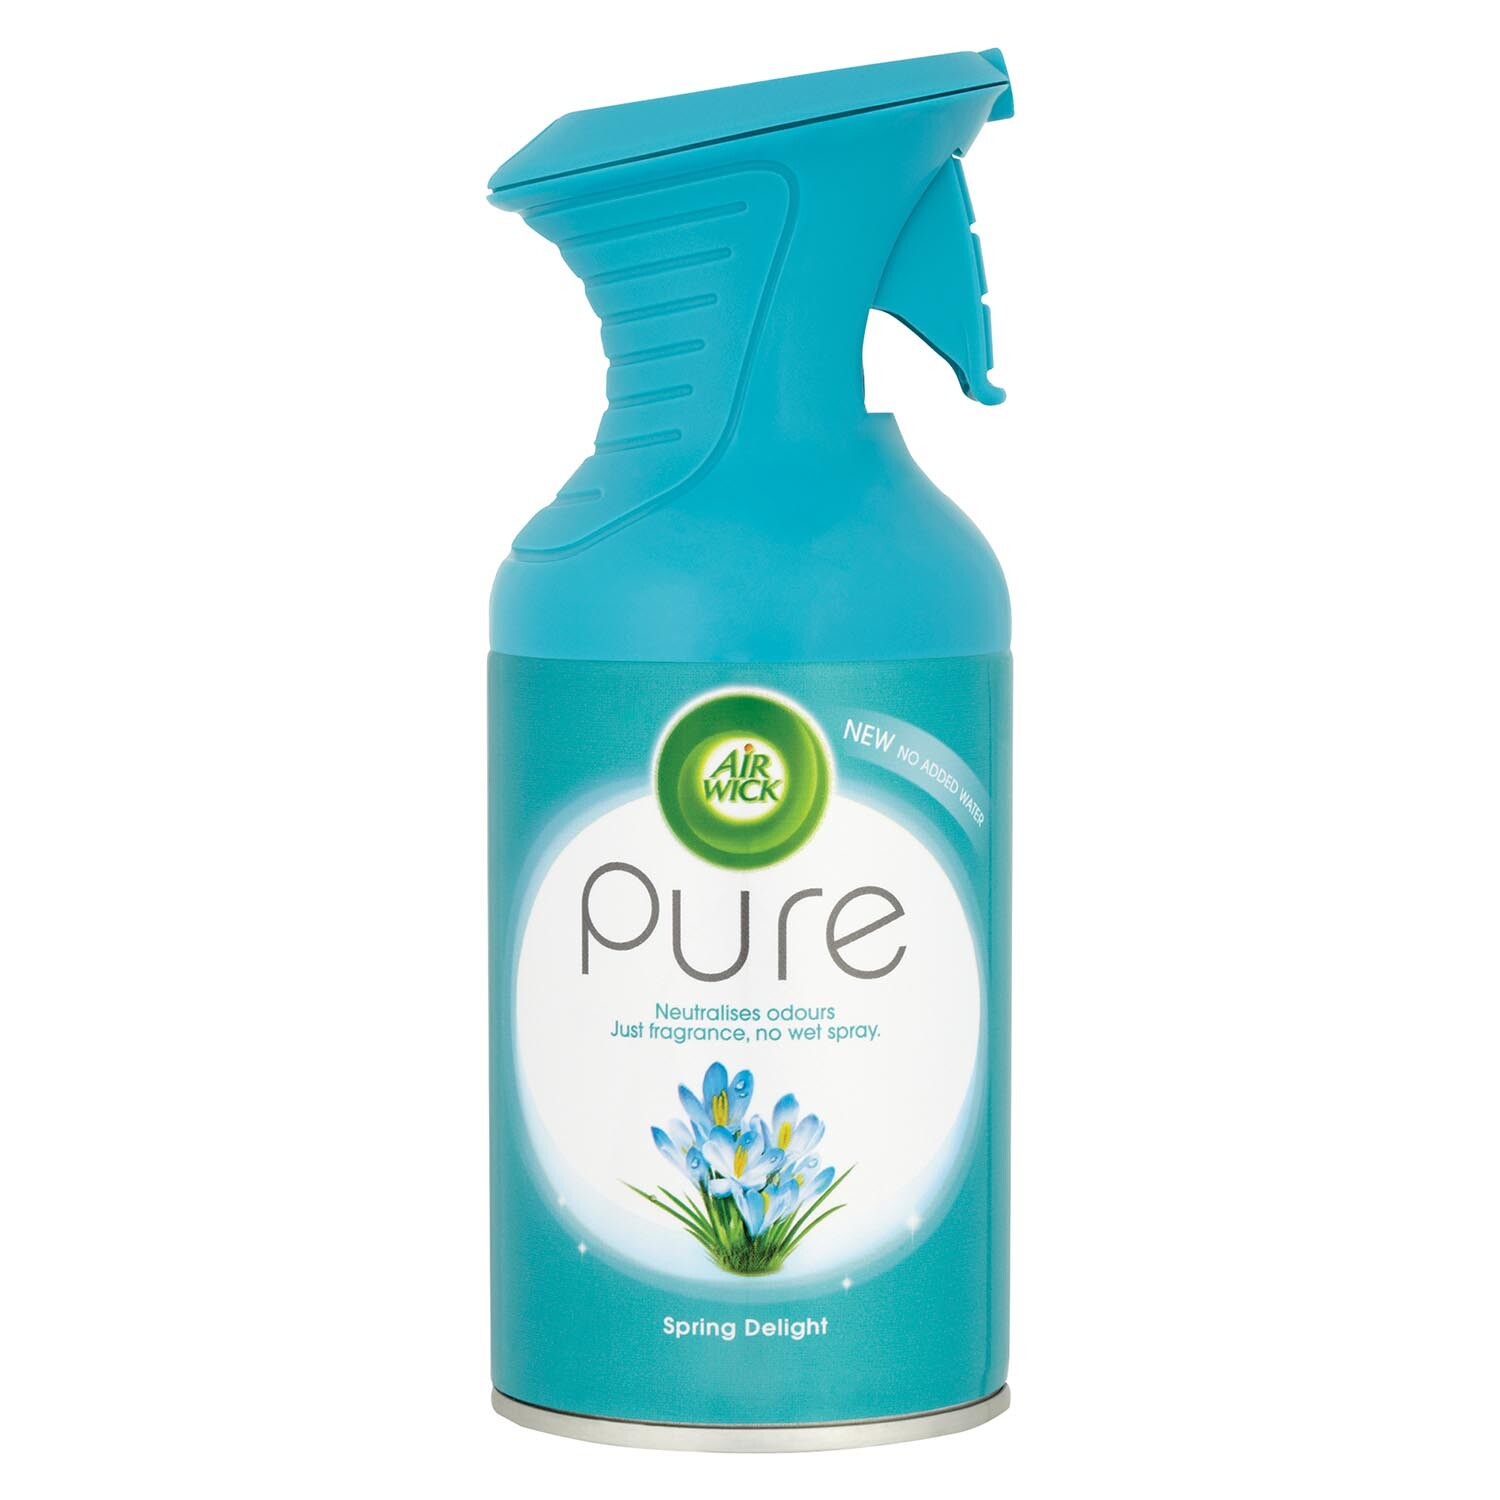 Airwick Pure Air Freshener 250ml - Spring Delight Image